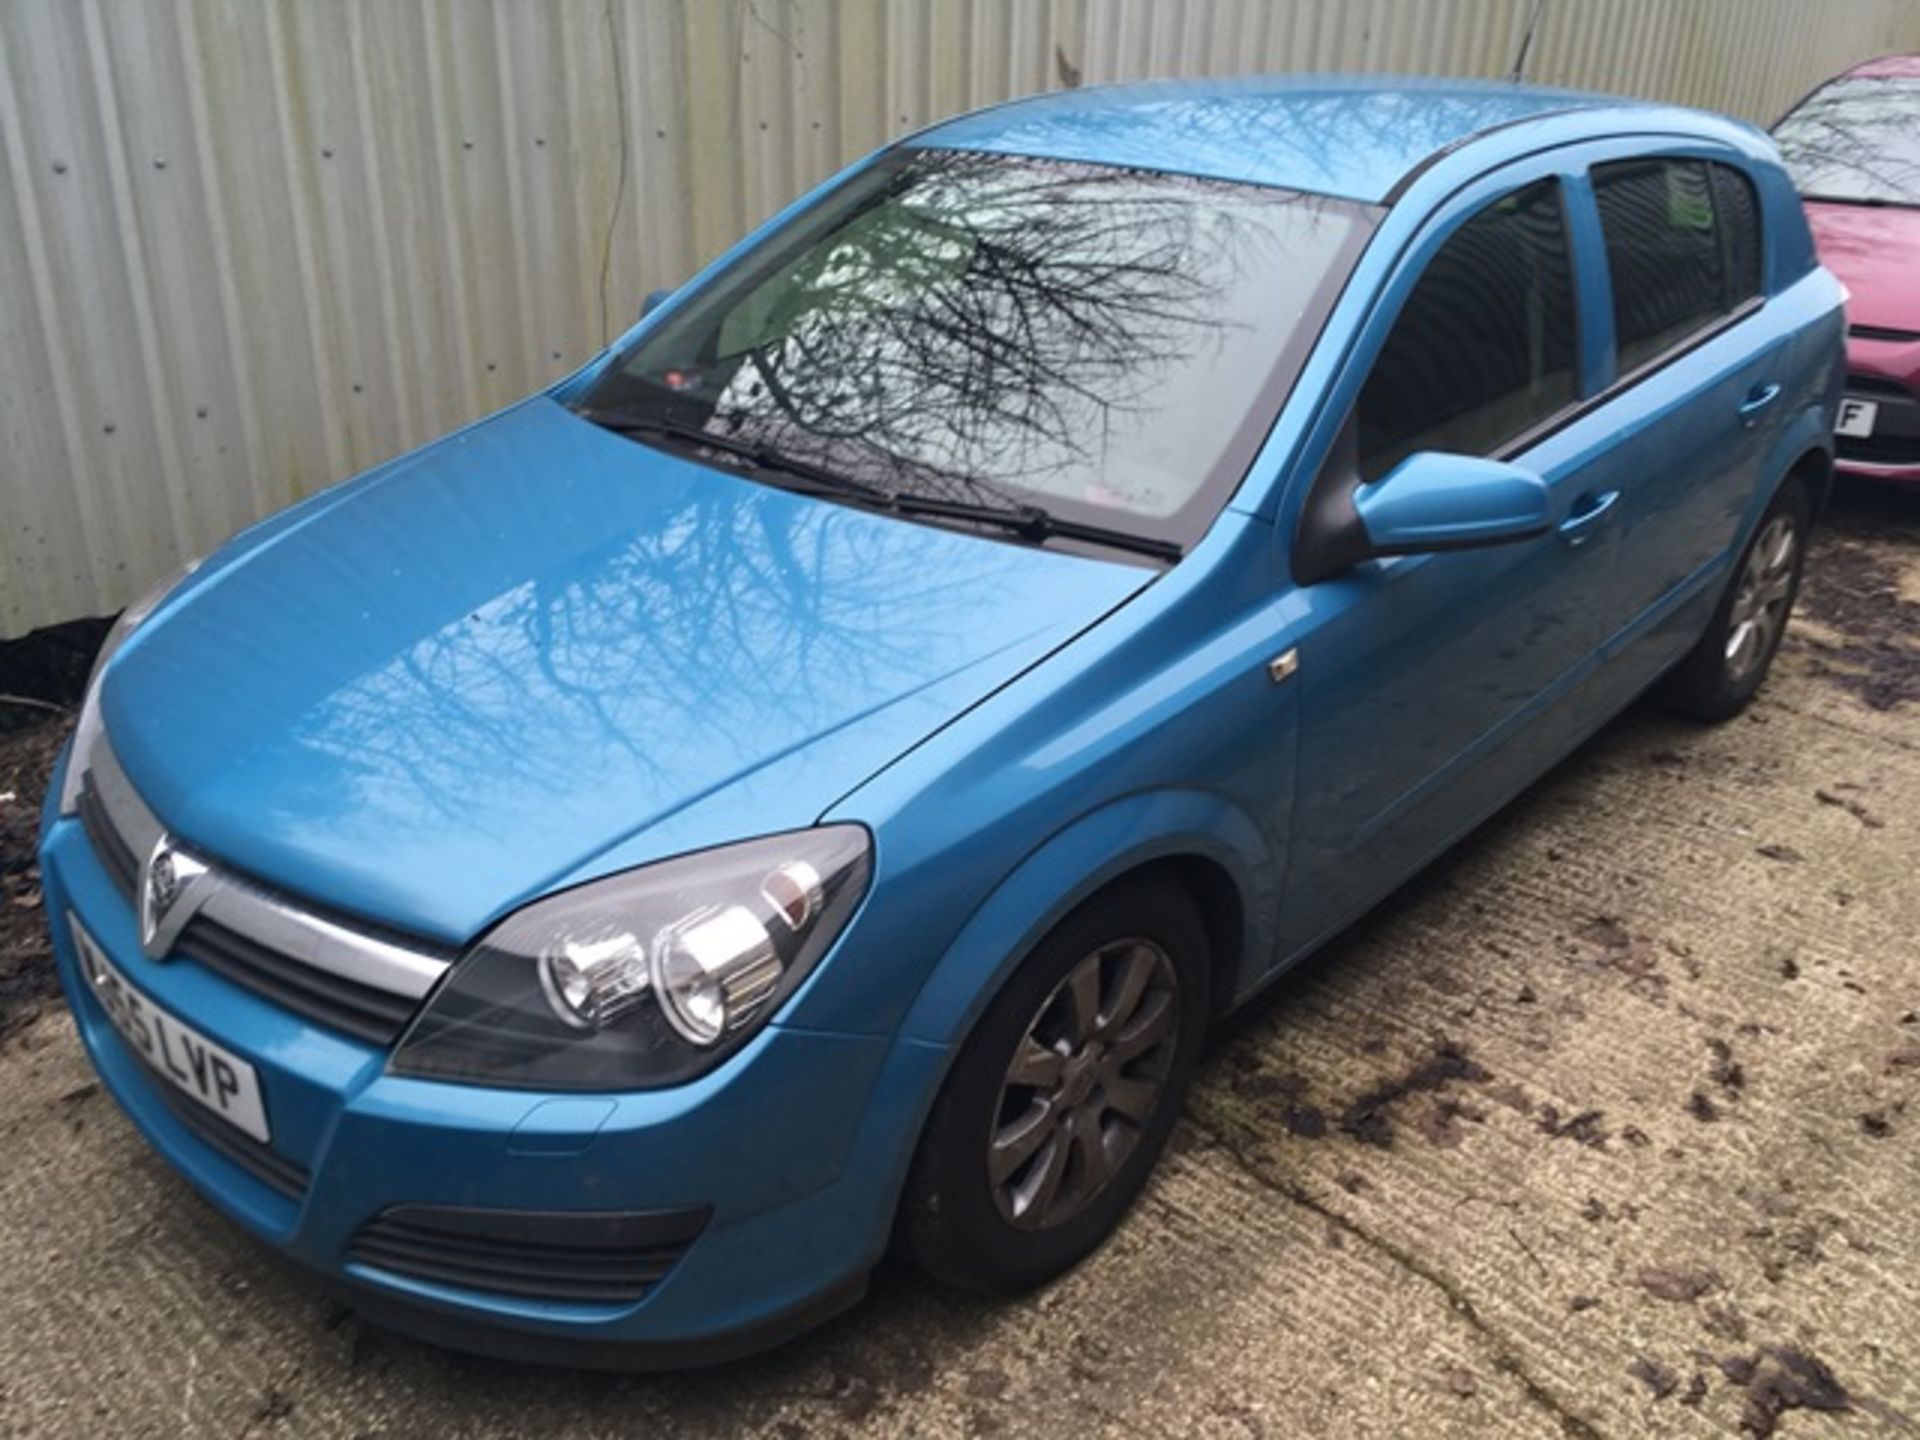 Vauxhall Astra 1.8 Automatic 5 door Hatchback Registration Number MJ55 LVP Recorded Mileage Approx